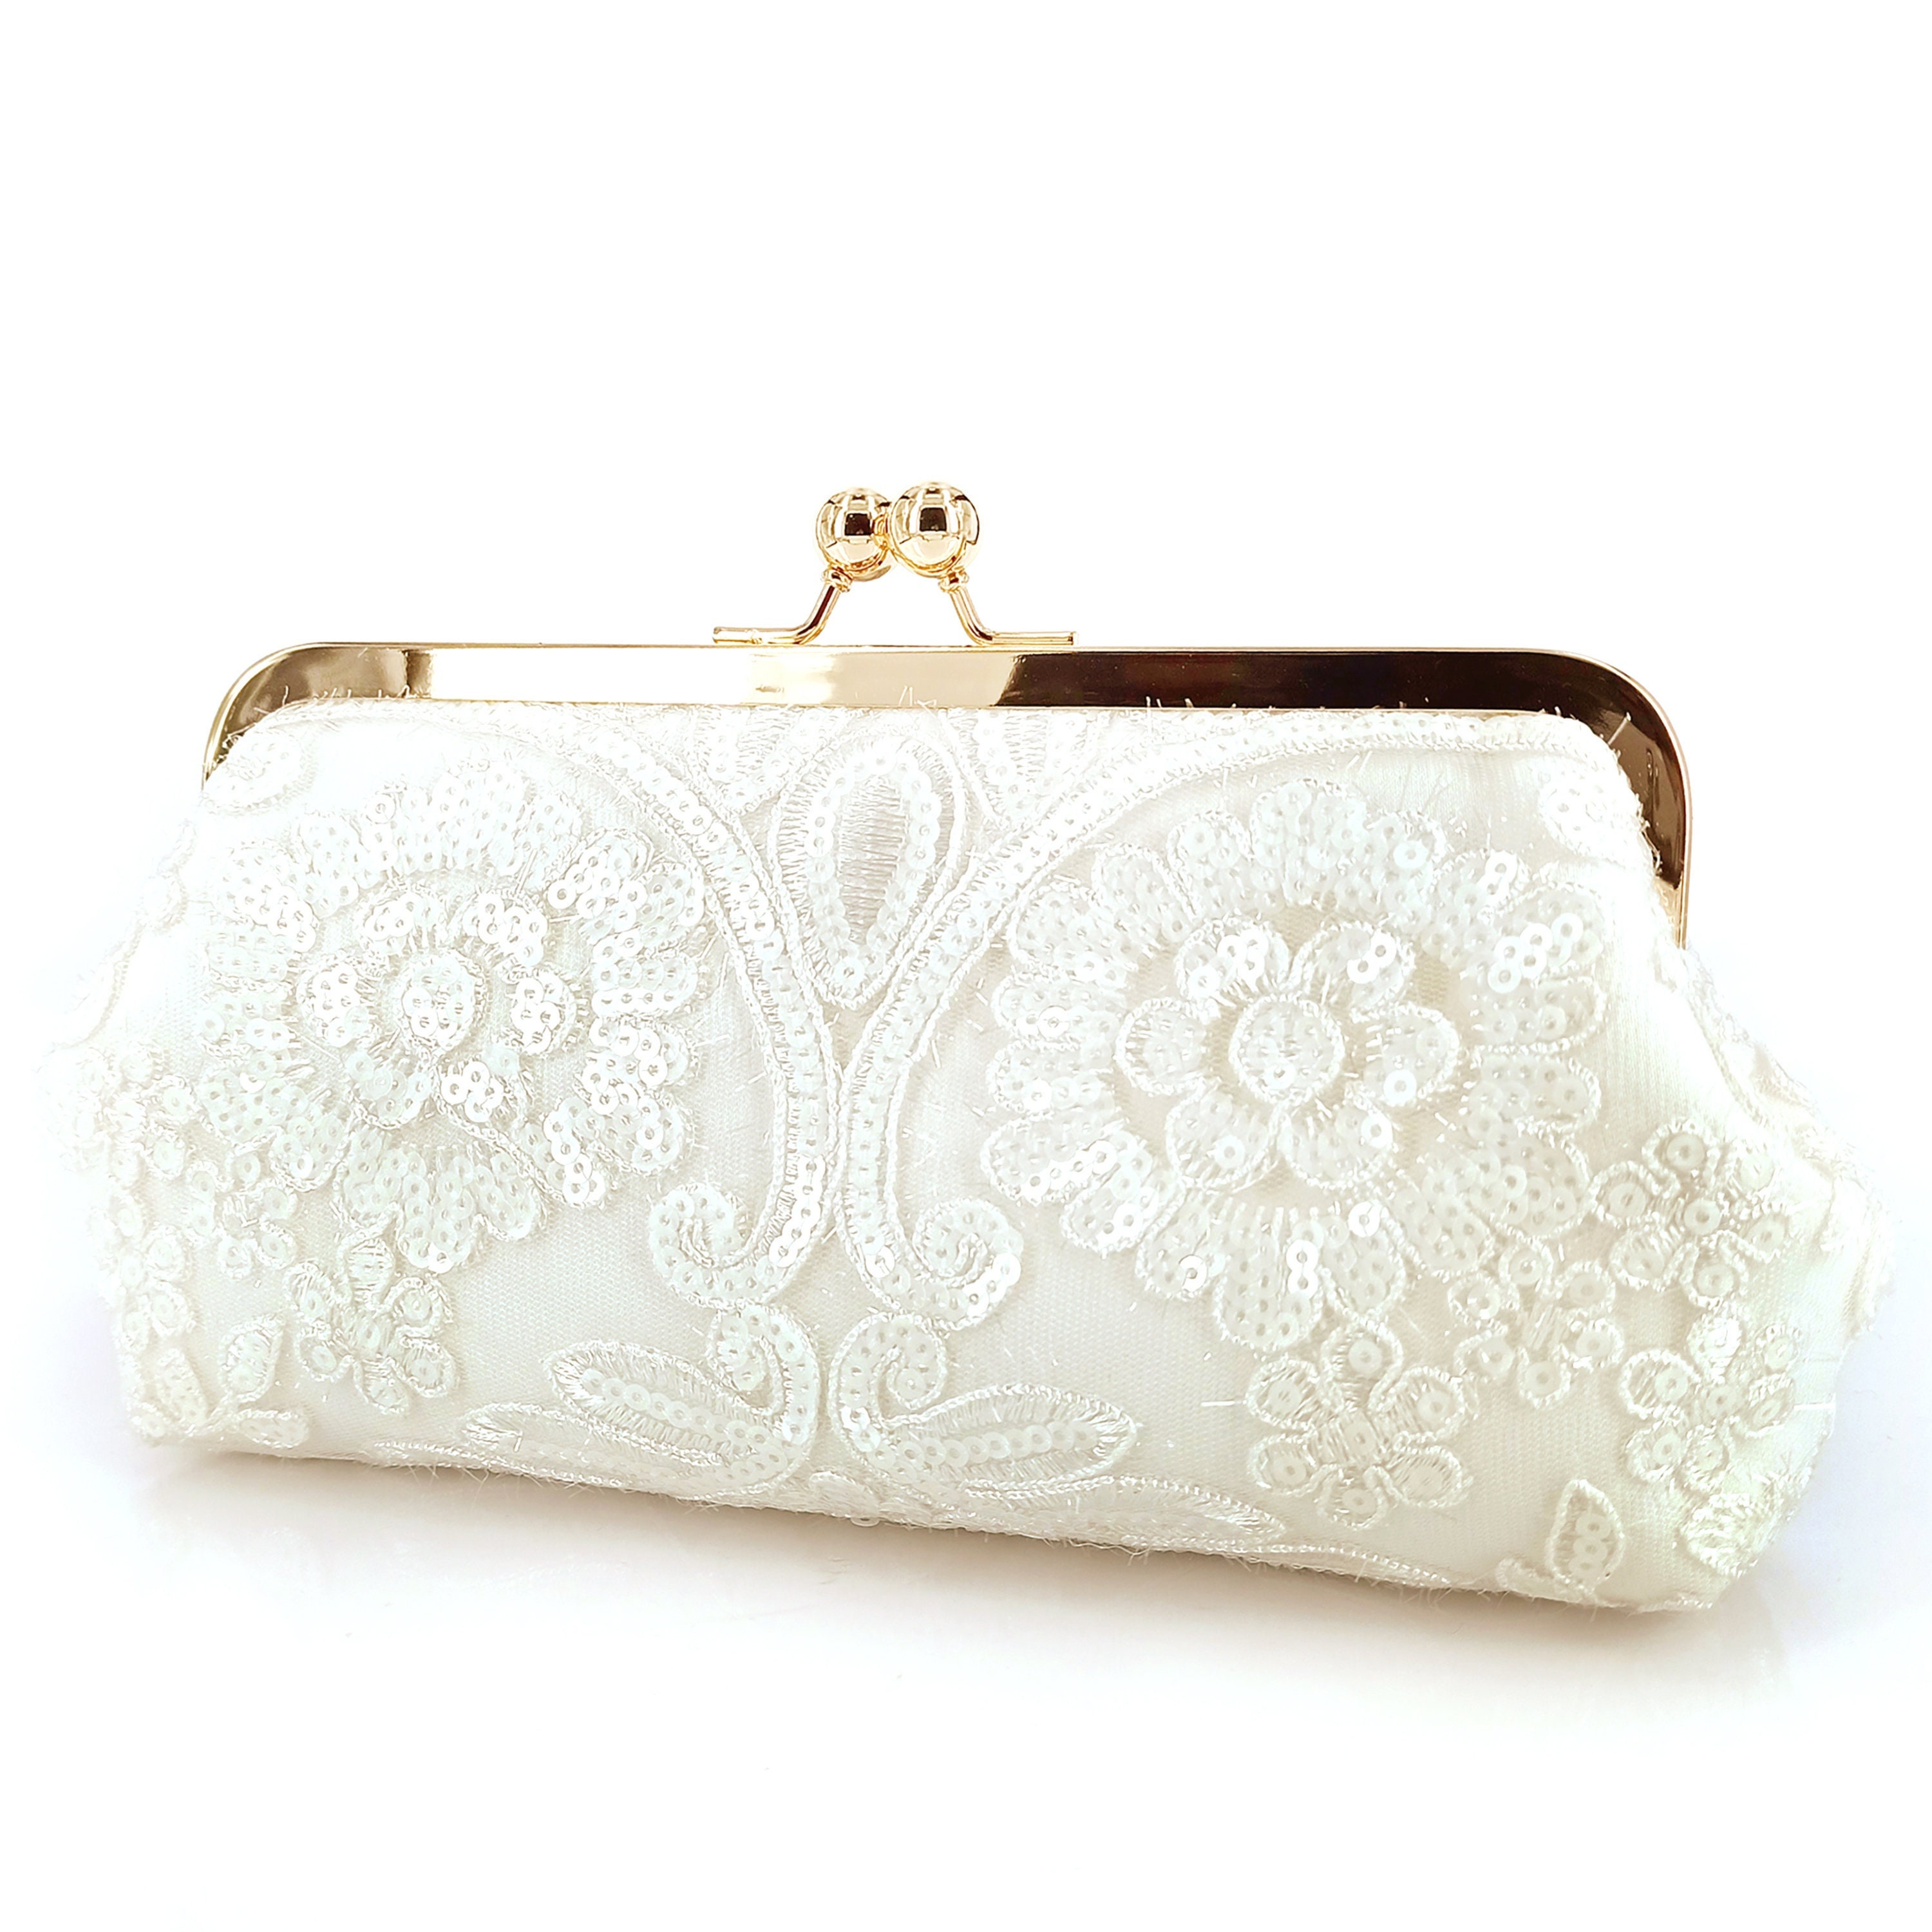 Off white Embroidered bridal Clutch bag | Bridal clutch bag, Bridal clutch,  Clutch bag